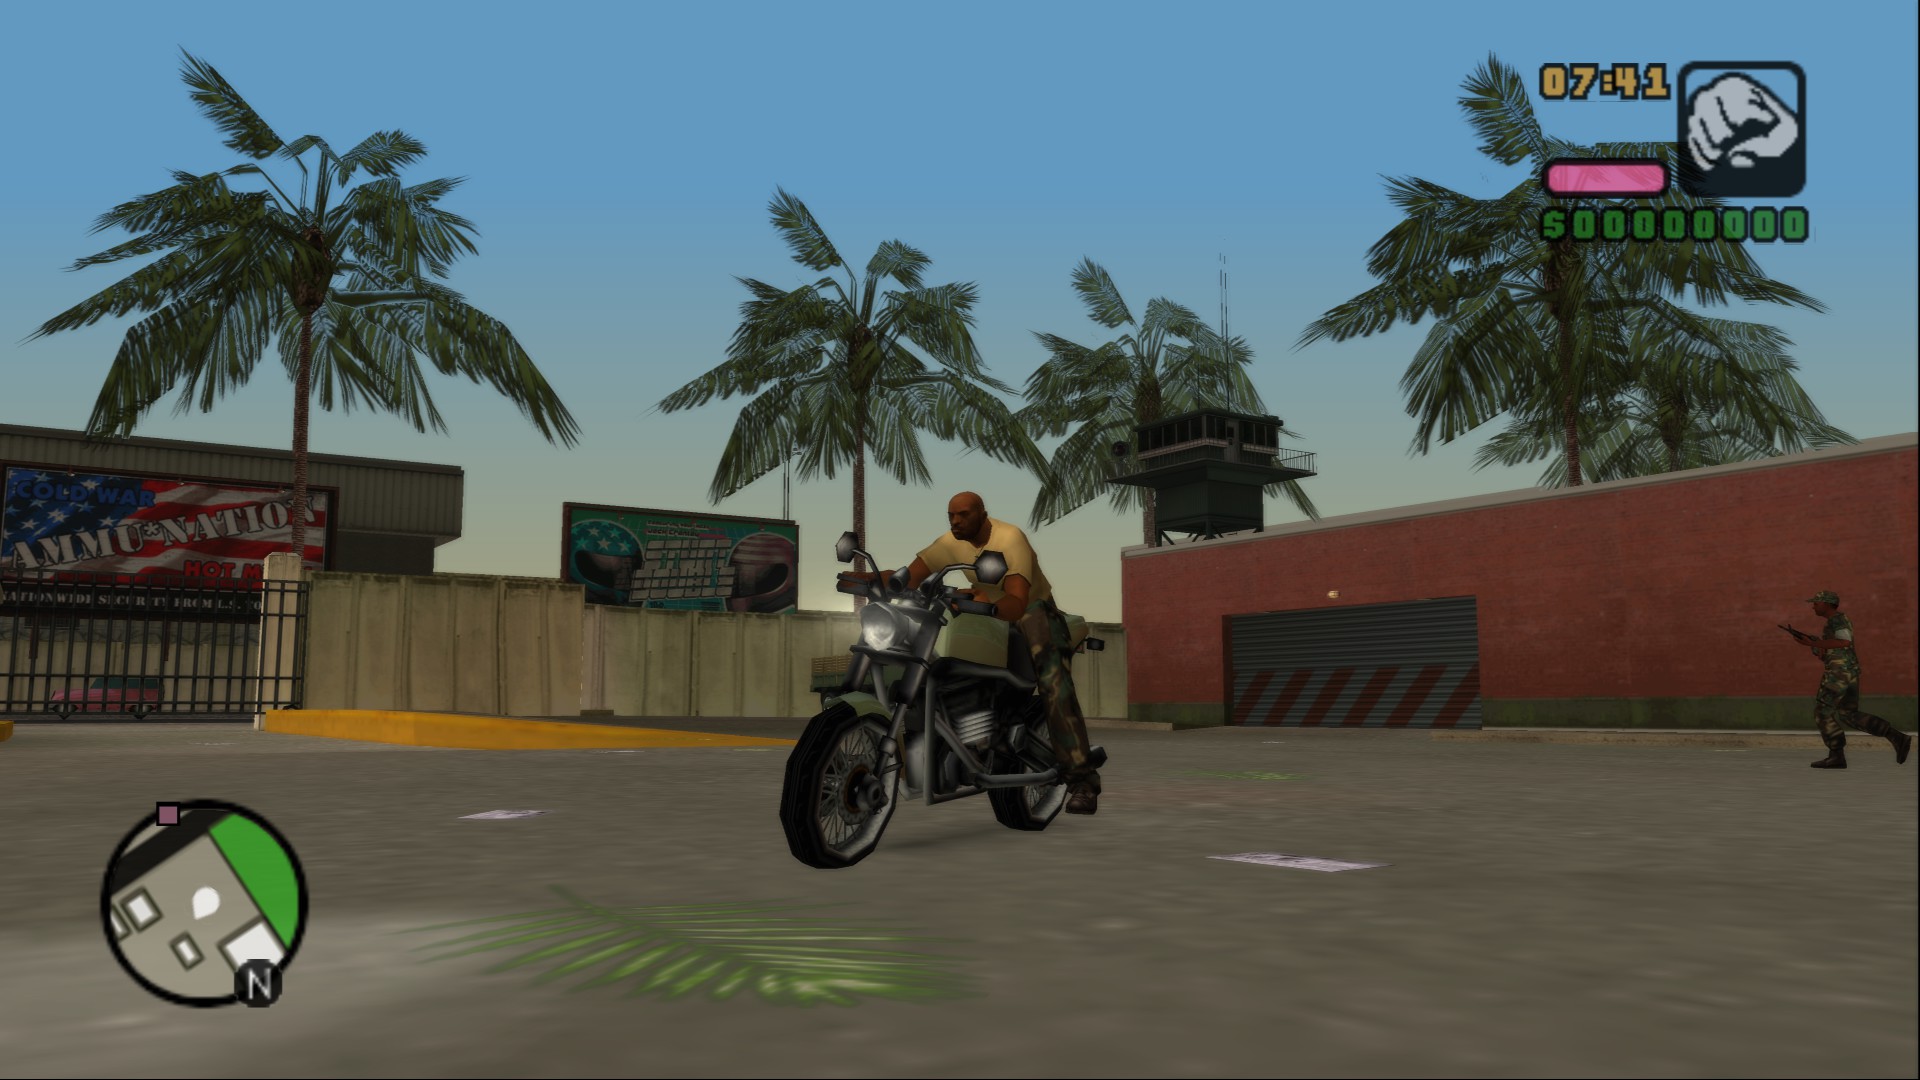 Download Vice City Stories PC adaptation for GTA Vice City Stories